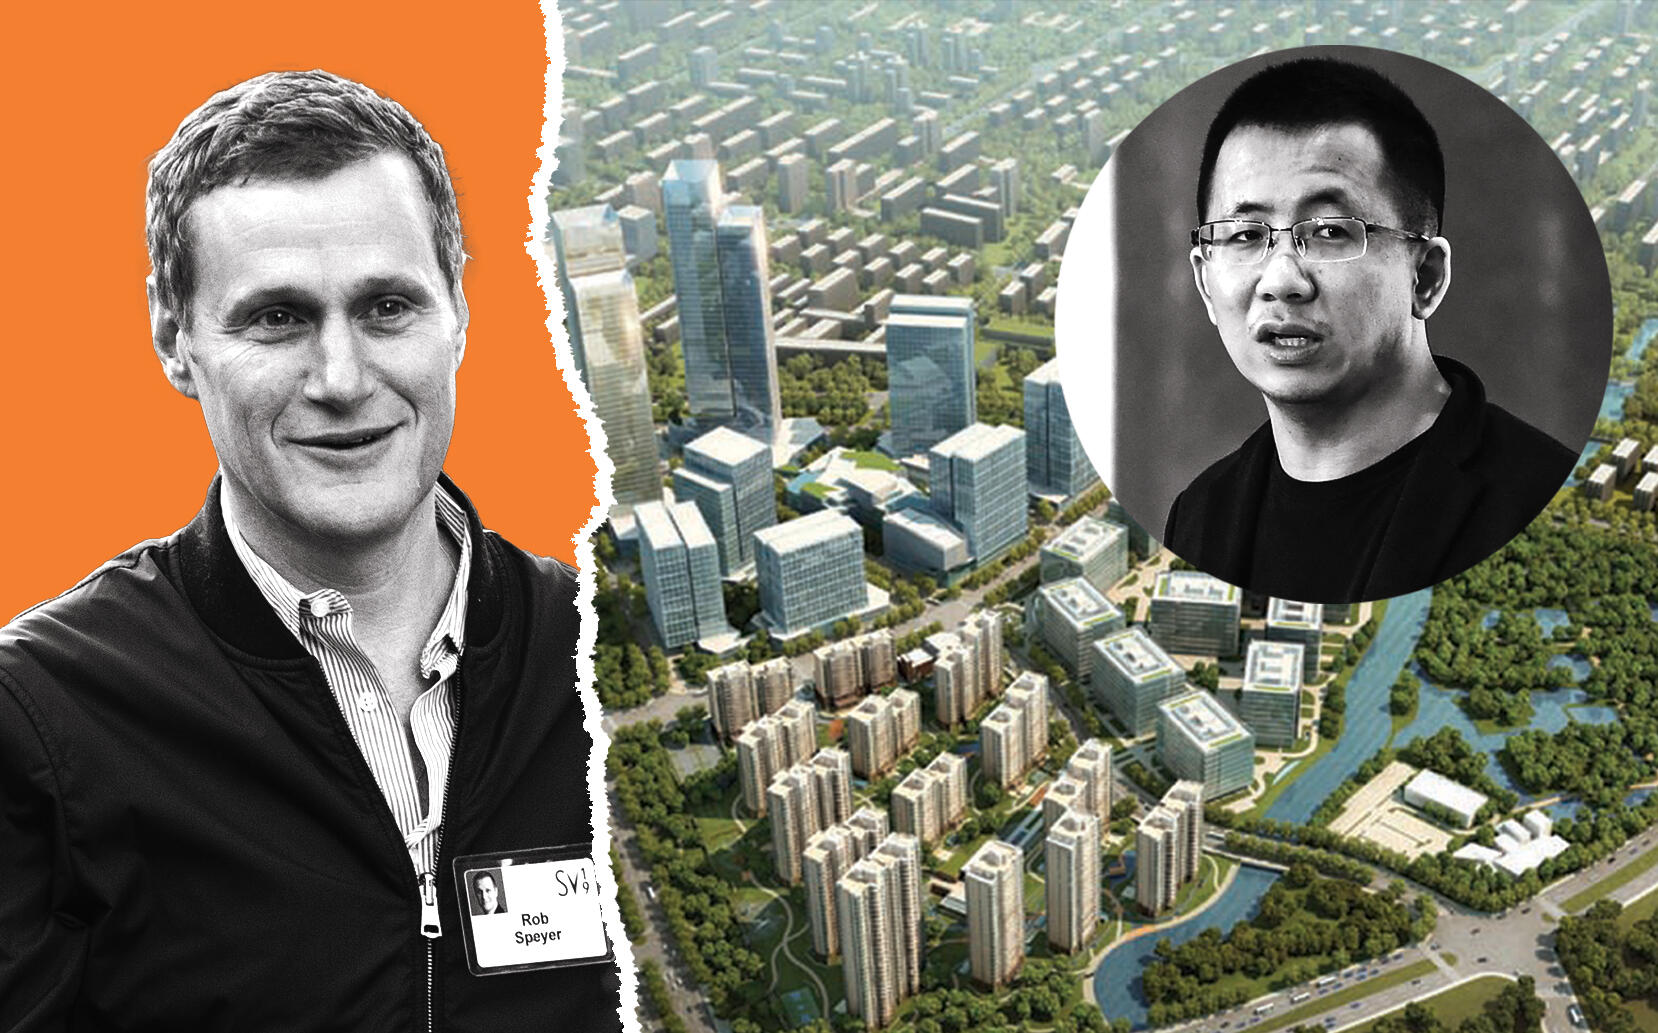 Tishman Speyer CEO Rob Speyer with ByteDance CEO Zhang Yiming and an aerial of The Springs (Getty, Tishman Speyer)